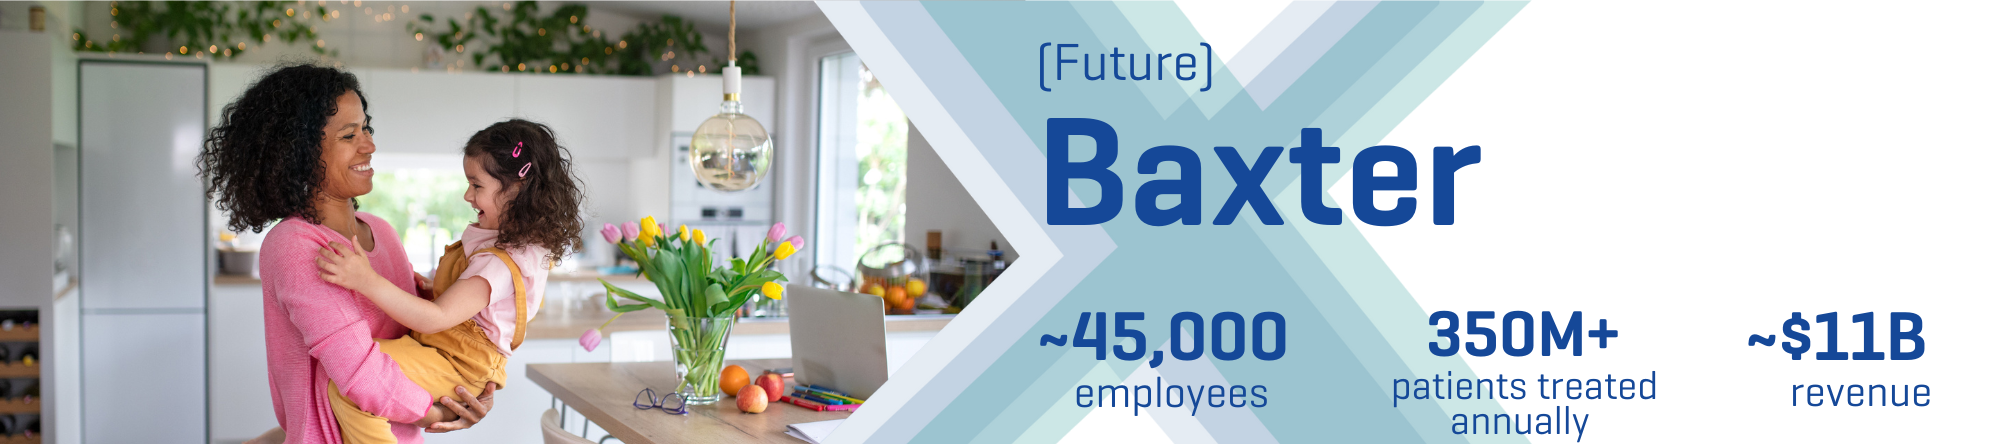 Image showing future Baxter which will have 45,000 employees, serve 350 million patients and have 11 billion in revenueand